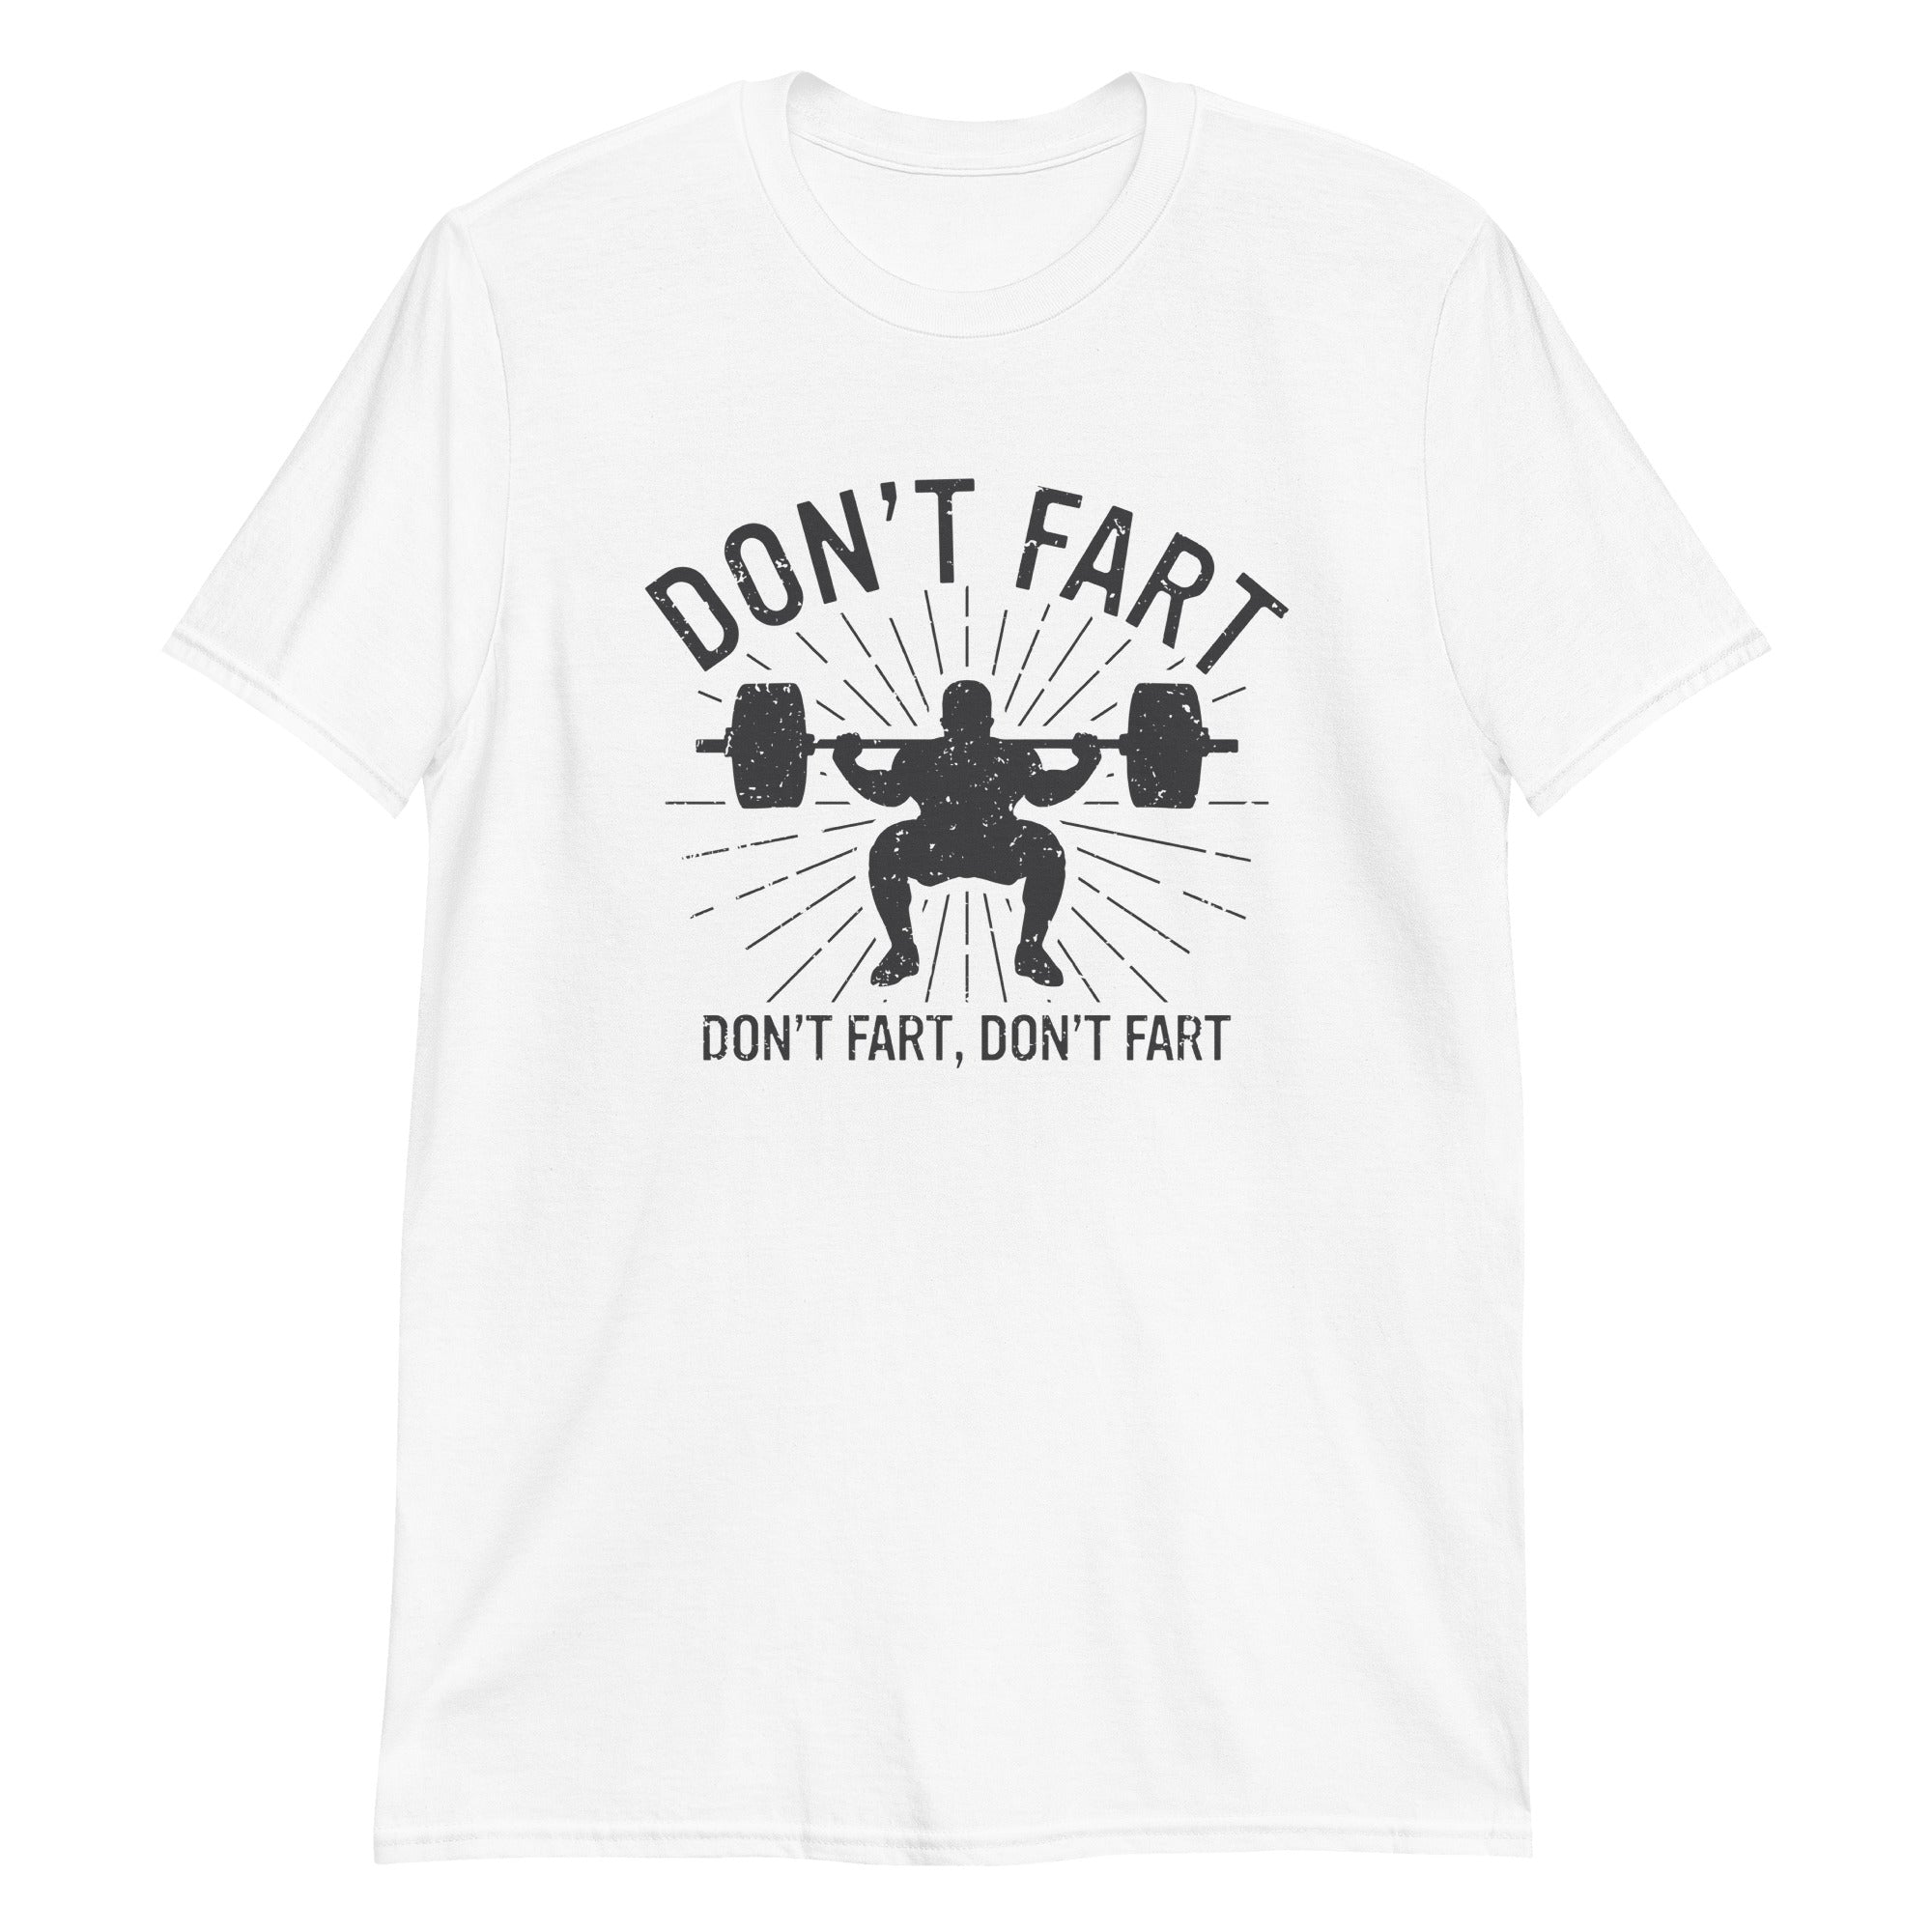 Don't fart